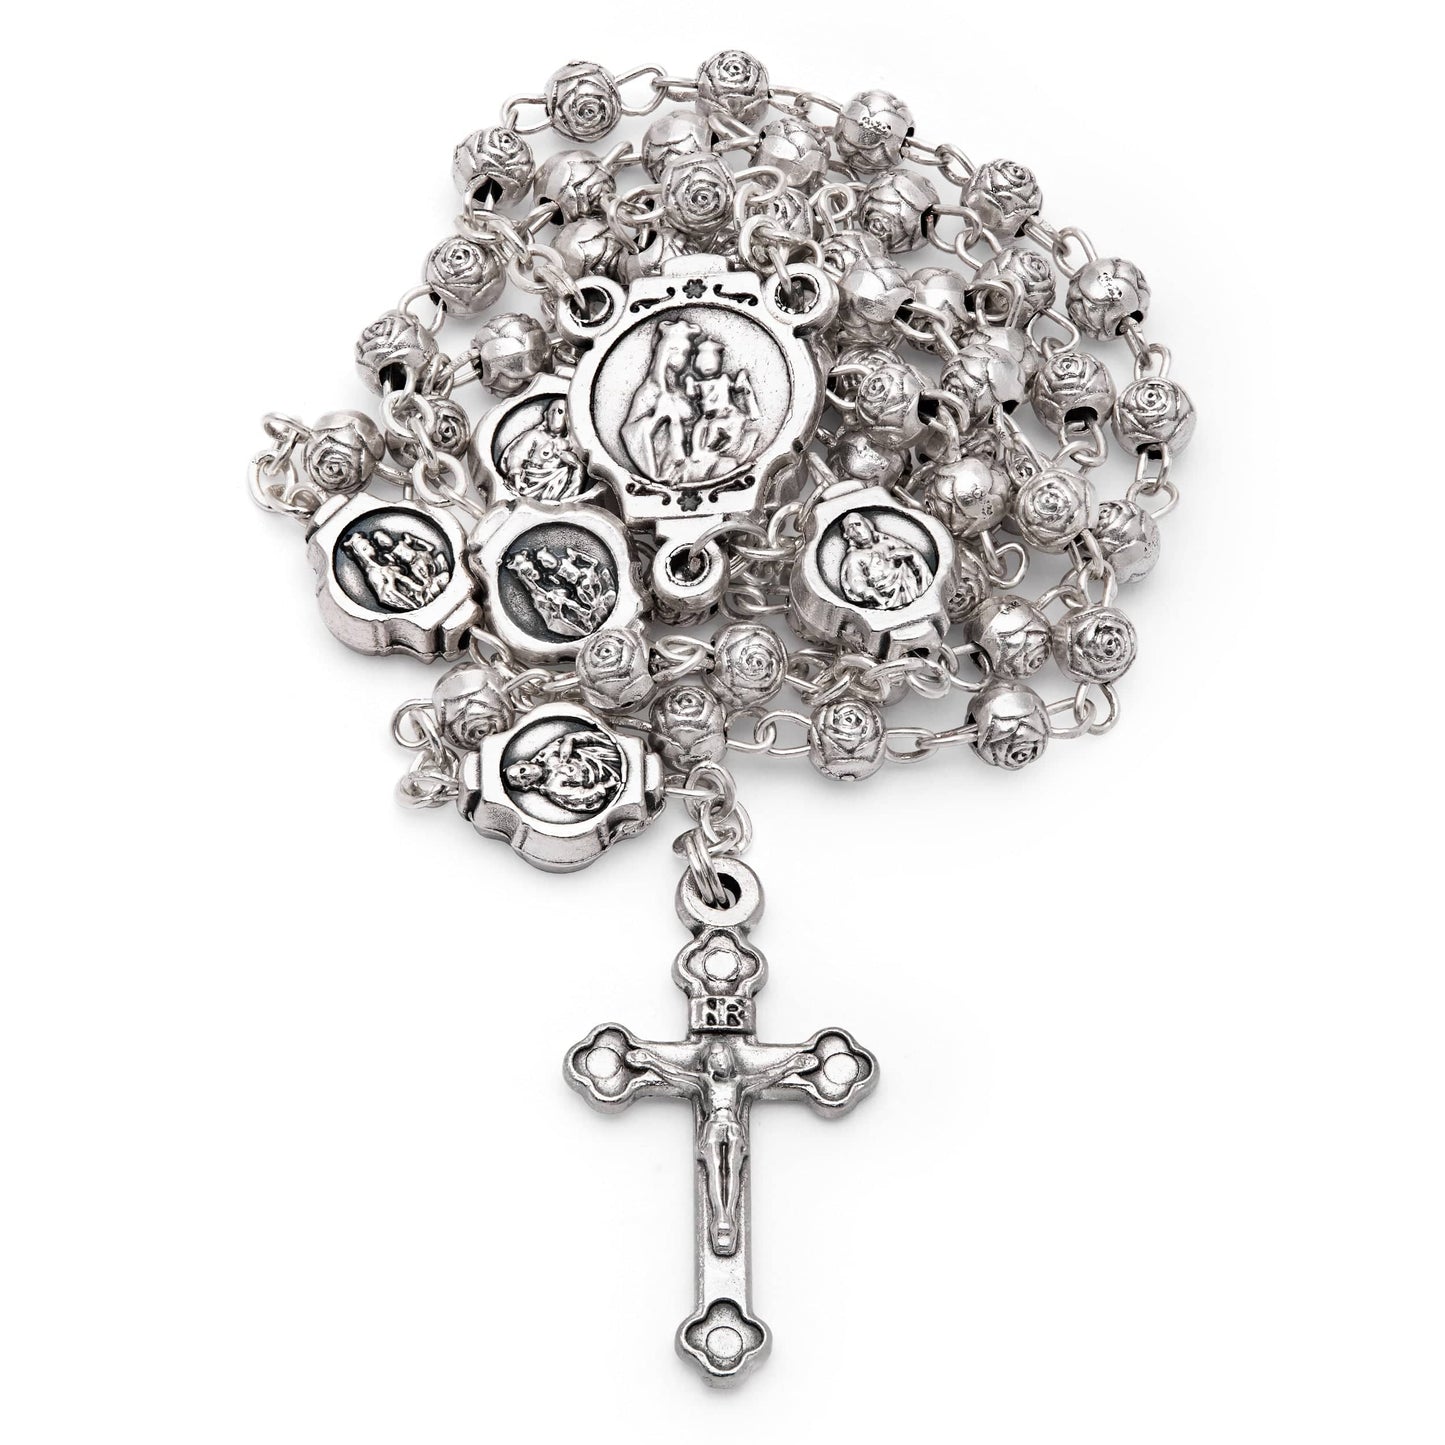 MONDO CATTOLICO Prayer Beads 36 cm (14.17 in) / 4 mm (0.15 in) Pewter Rosary and Holder with Jesus of Sacred Heart